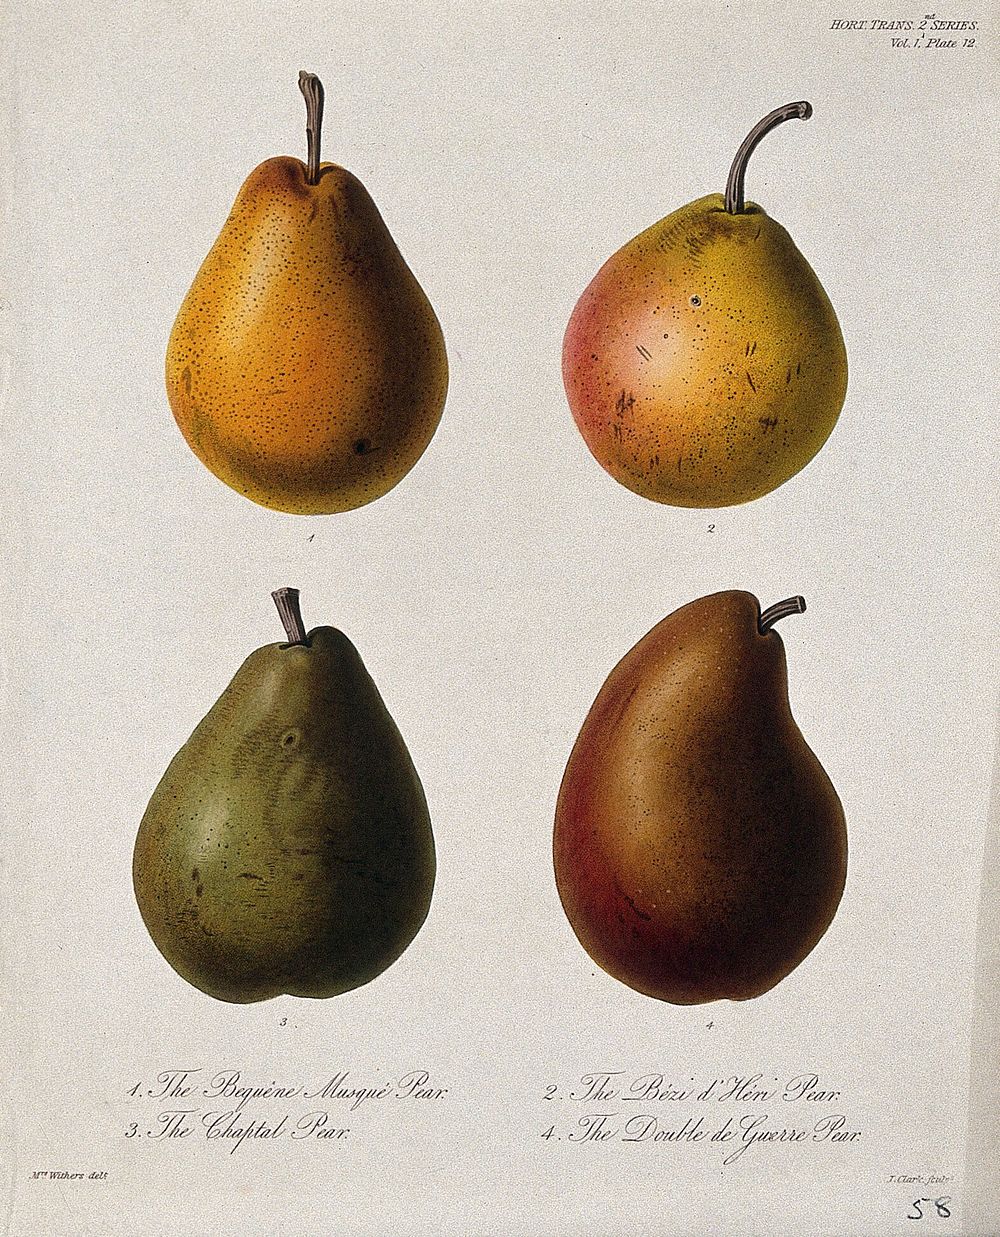 Four cultivars of pear (Pyrus communis cv.): entire fruits. Coloured etching by W. Clark, c. 1835, after Mrs. Withers.